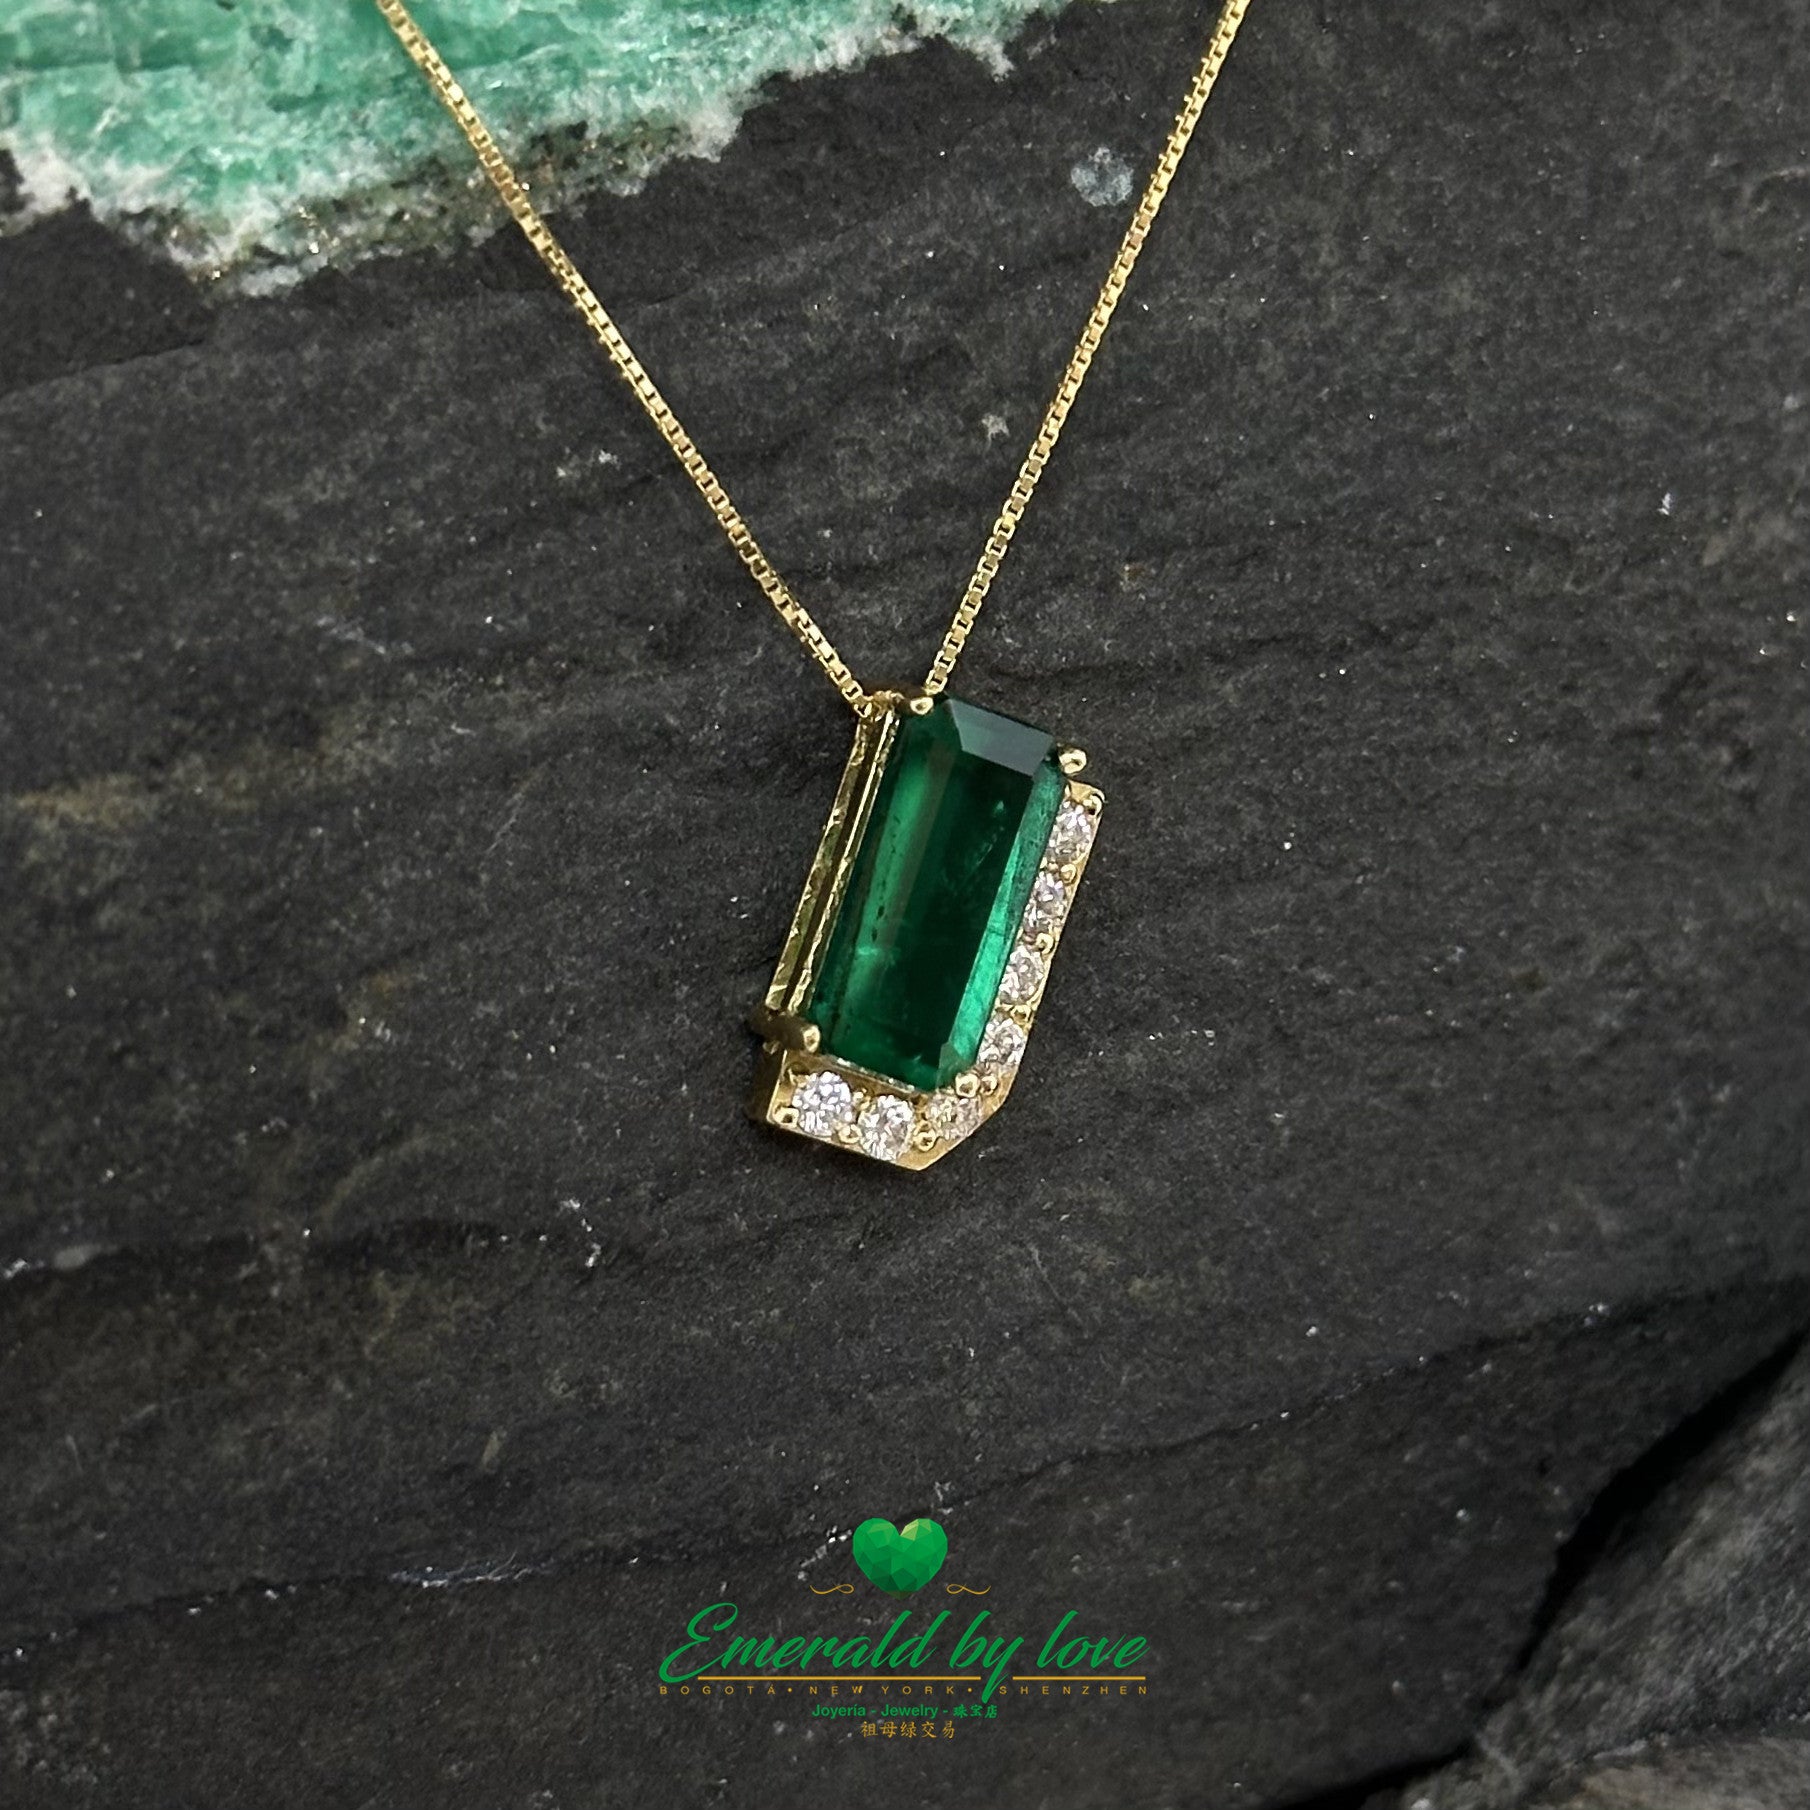 Luxurious Yellow Gold Pendant with 1.66 Ct Rectangular Emerald and Diamond Accent